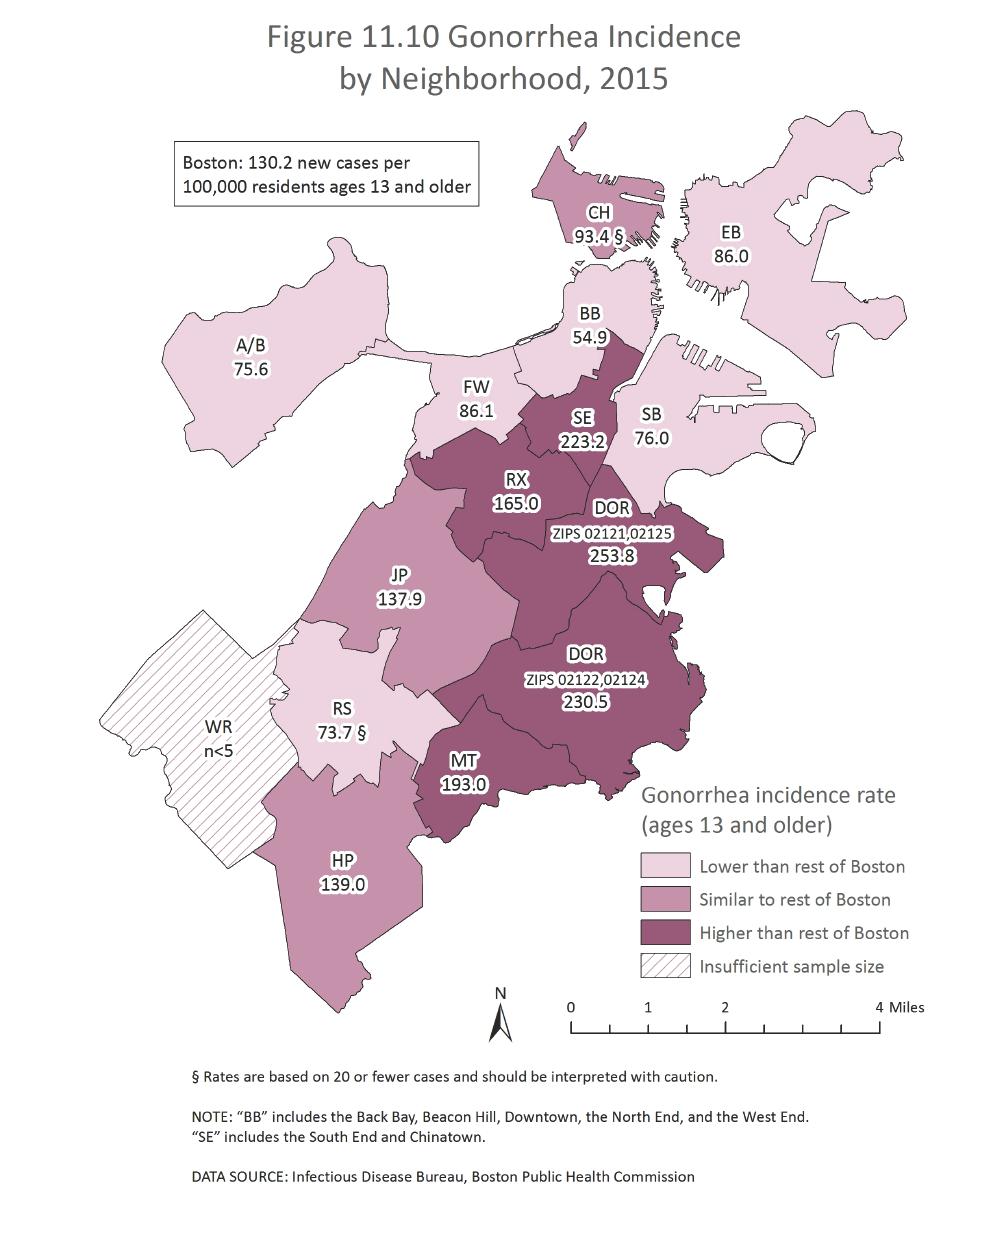 Health of Boston 2016-2017 In 2015, the incidence rate for gonorrhea among Boston residents was 130.2 new cases per 100,000 residents ages 13 and older.